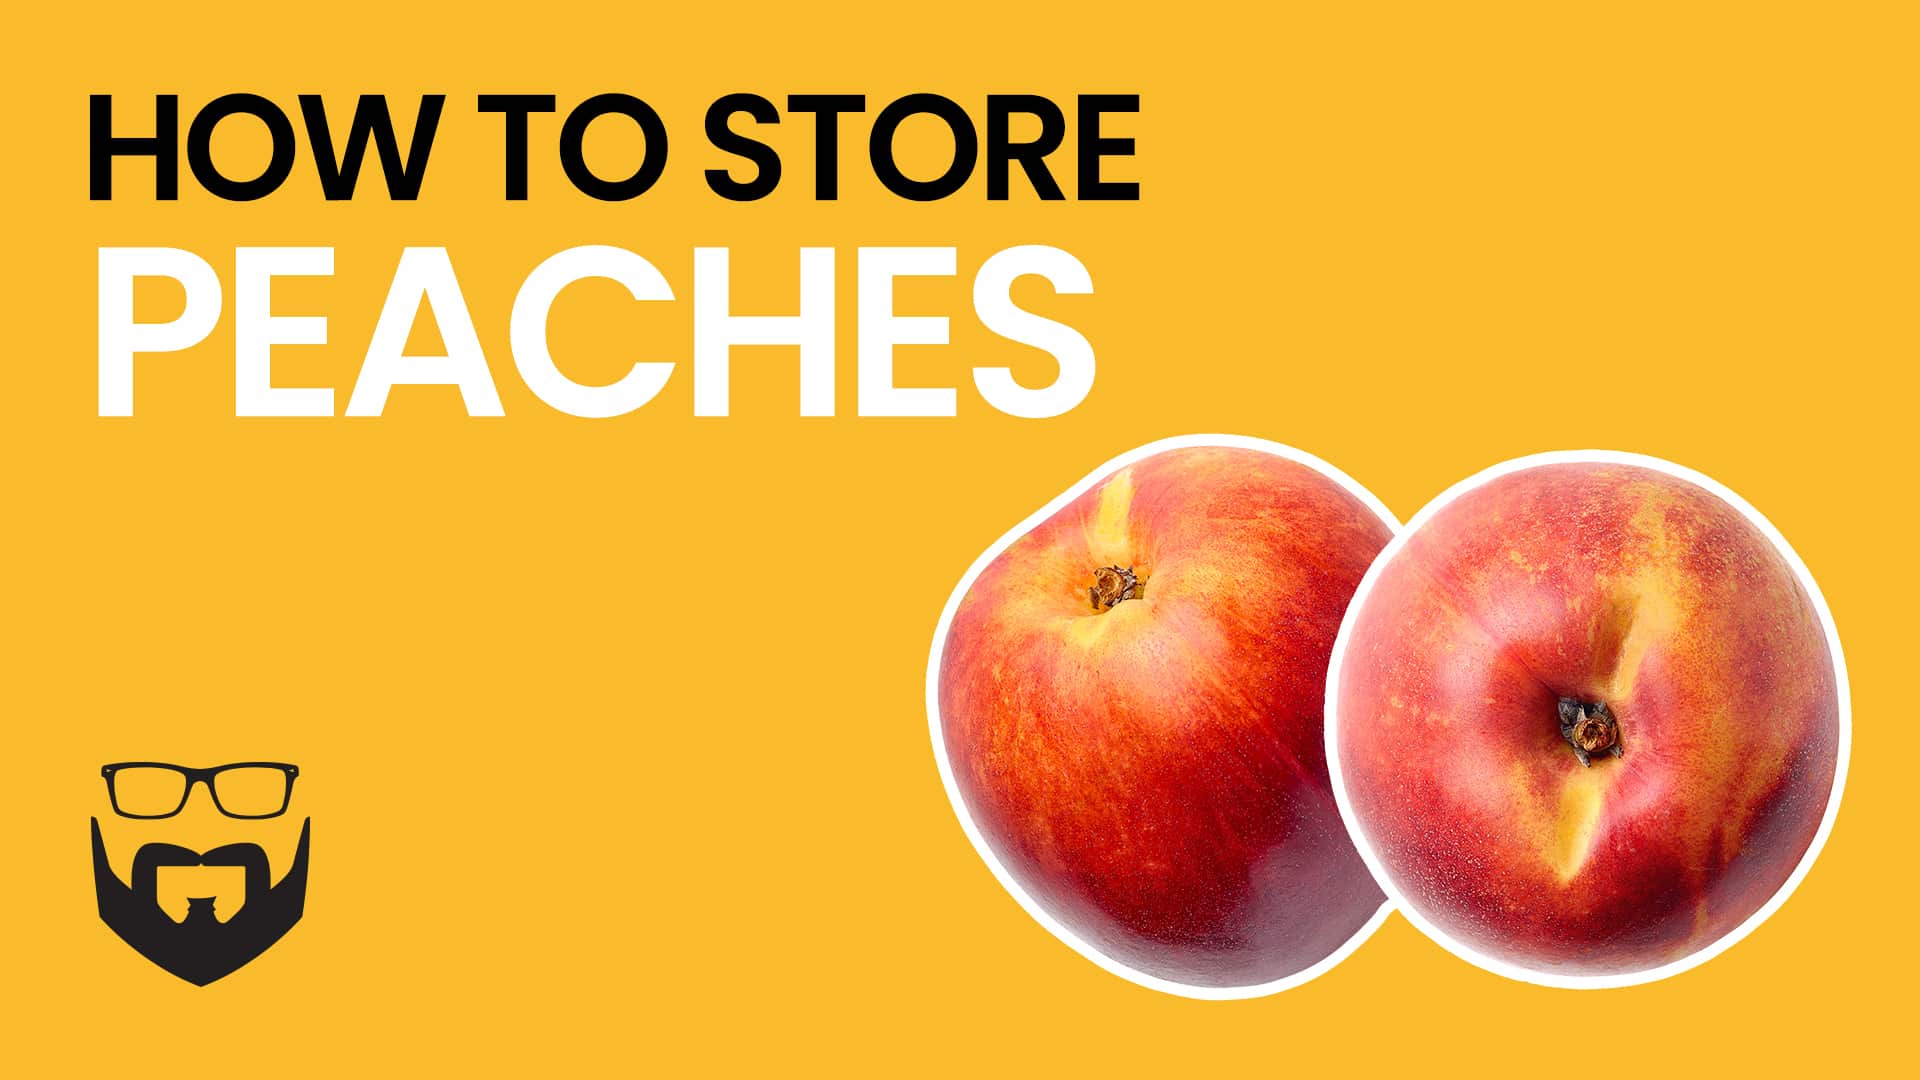 How to Store Peaches Video - Yellow